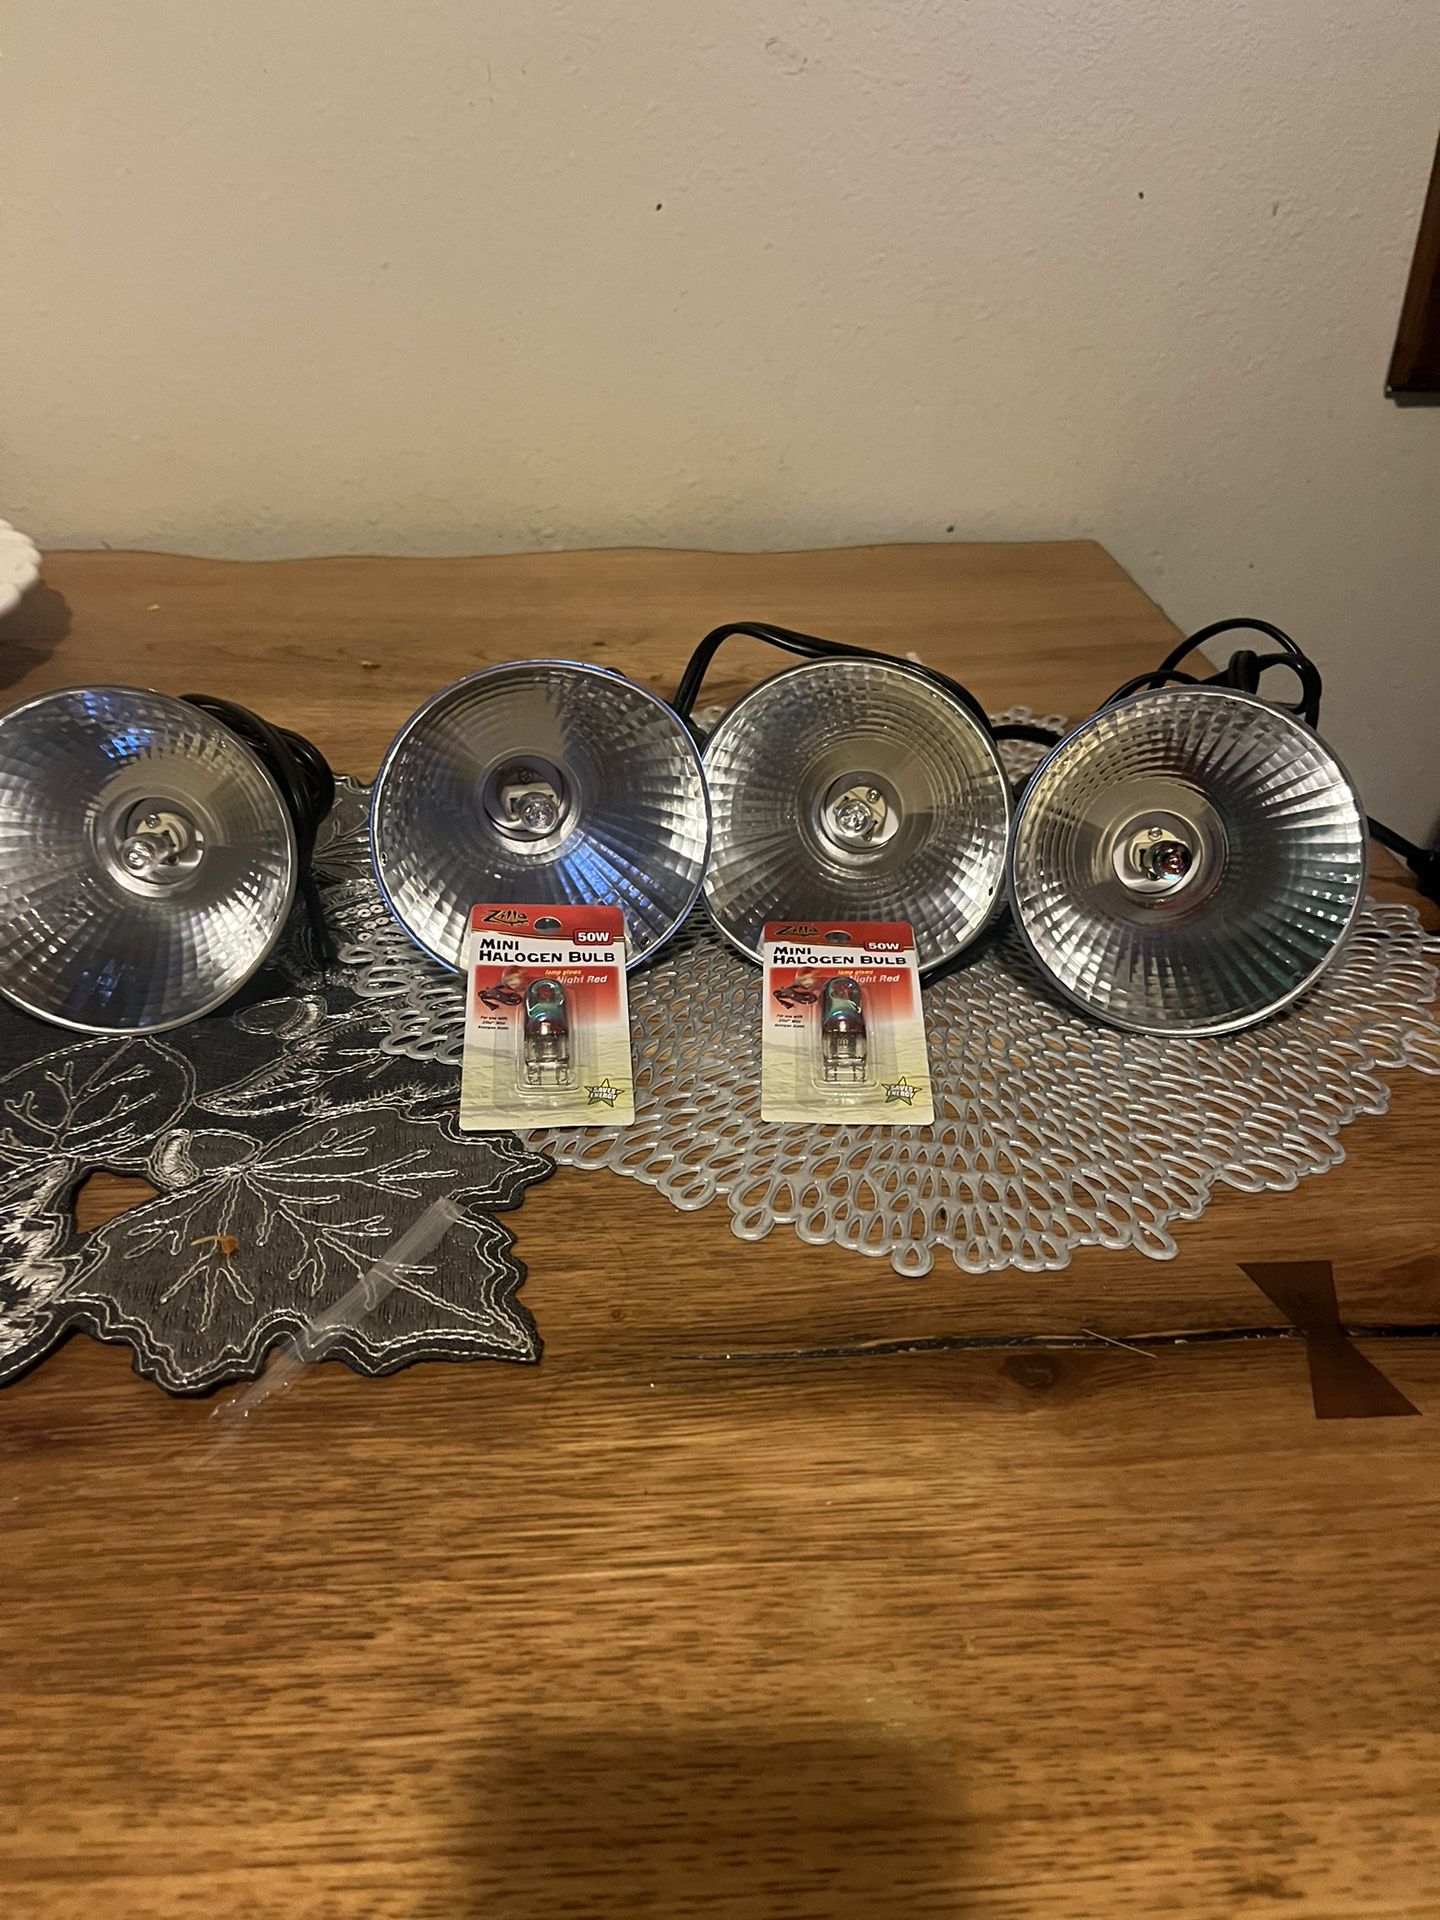  Heating Lamps